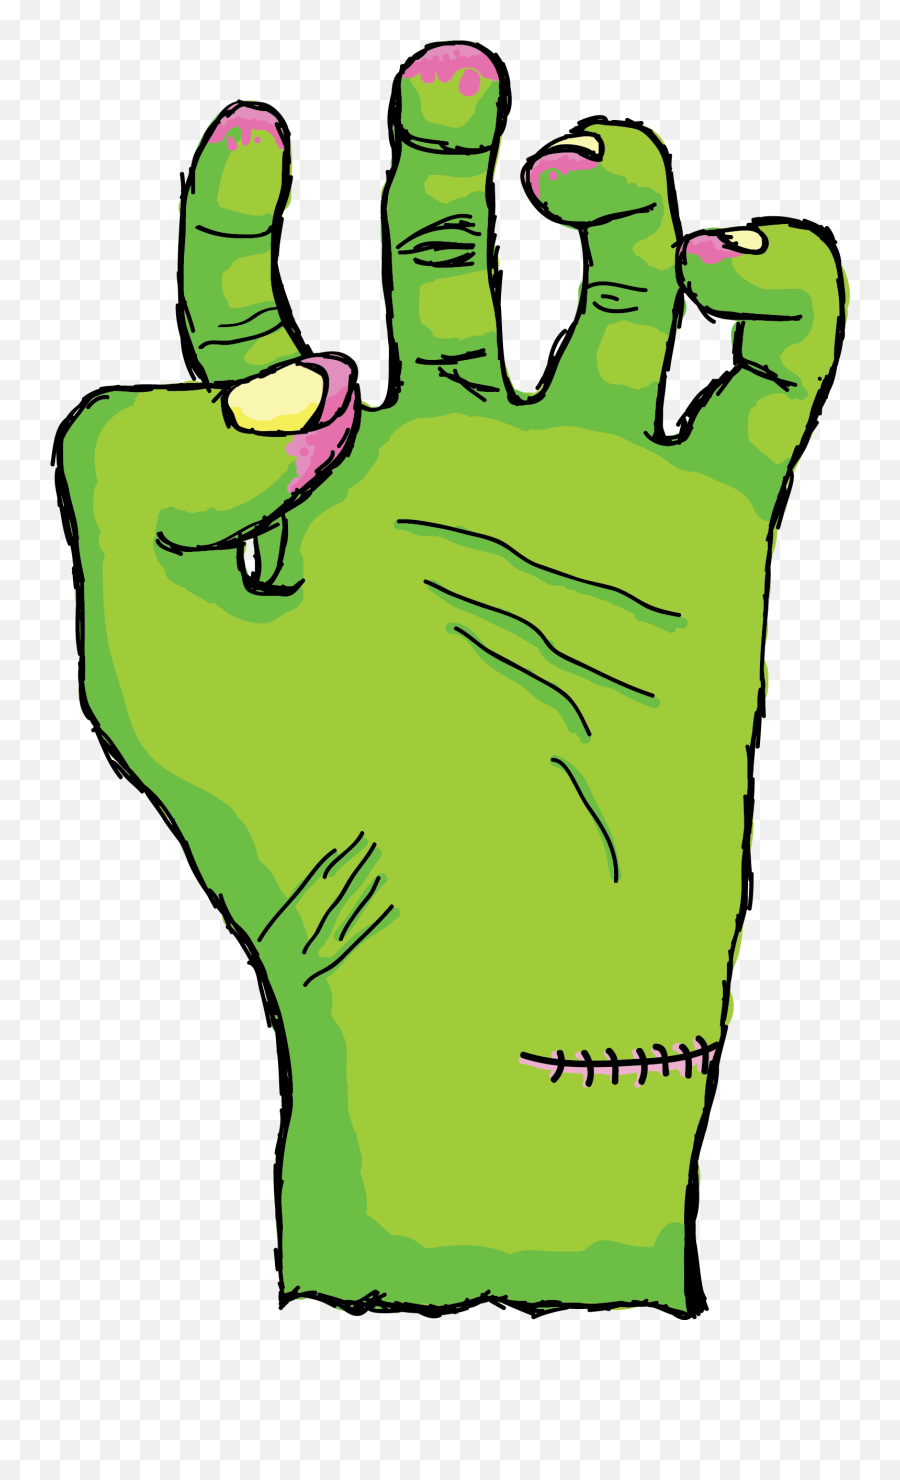 Zombie Hand Png - Zombiehand 1160749 Vippng Sign Language Emoji,Zombie Hand Png